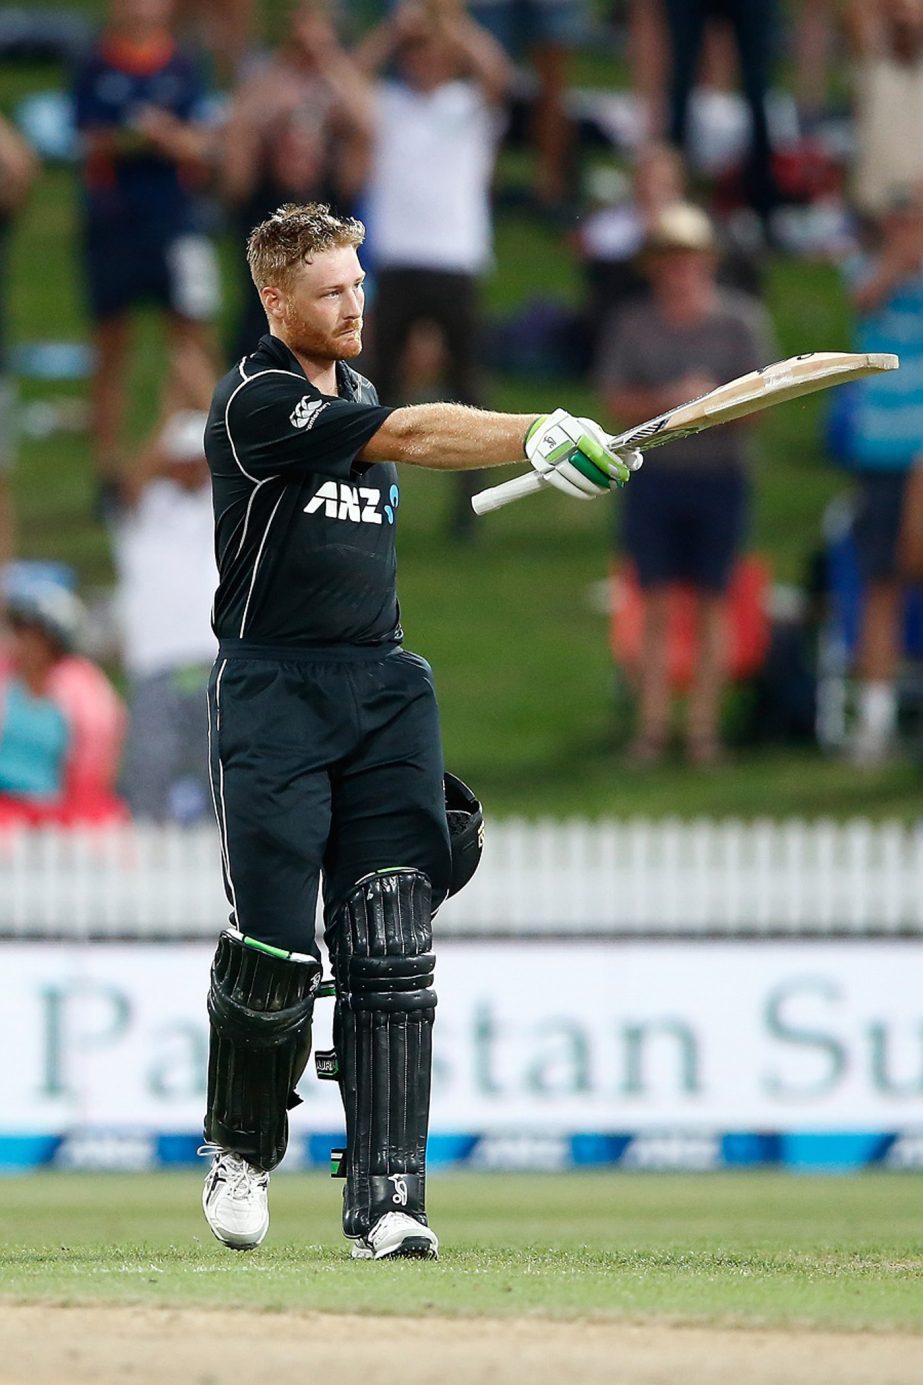 Martin Guptill of New Zealand celebrates his century during game four of the One Day International series between New Zealand and South Africa in Hamilton, New Zealand on Wednesday.